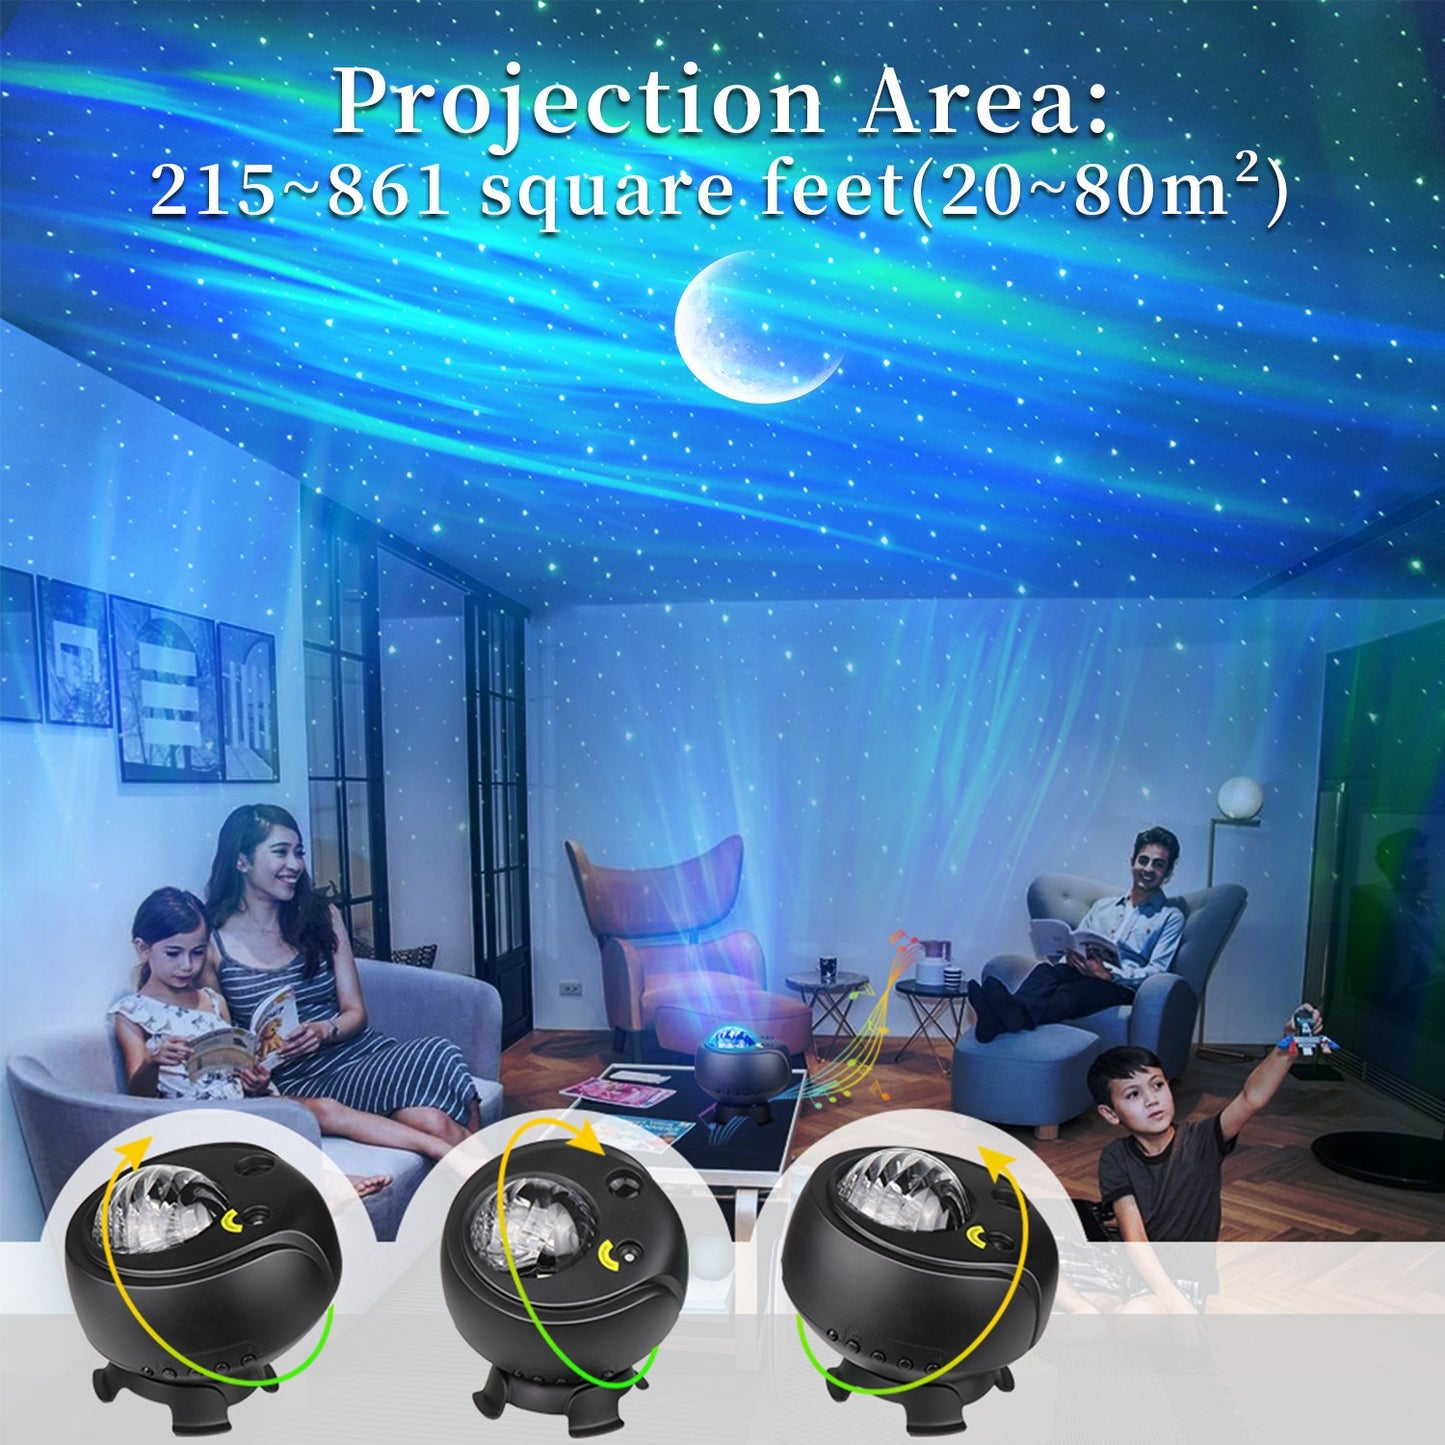 Northern Lights Starry Sky Dome Light Projection Atmosphere